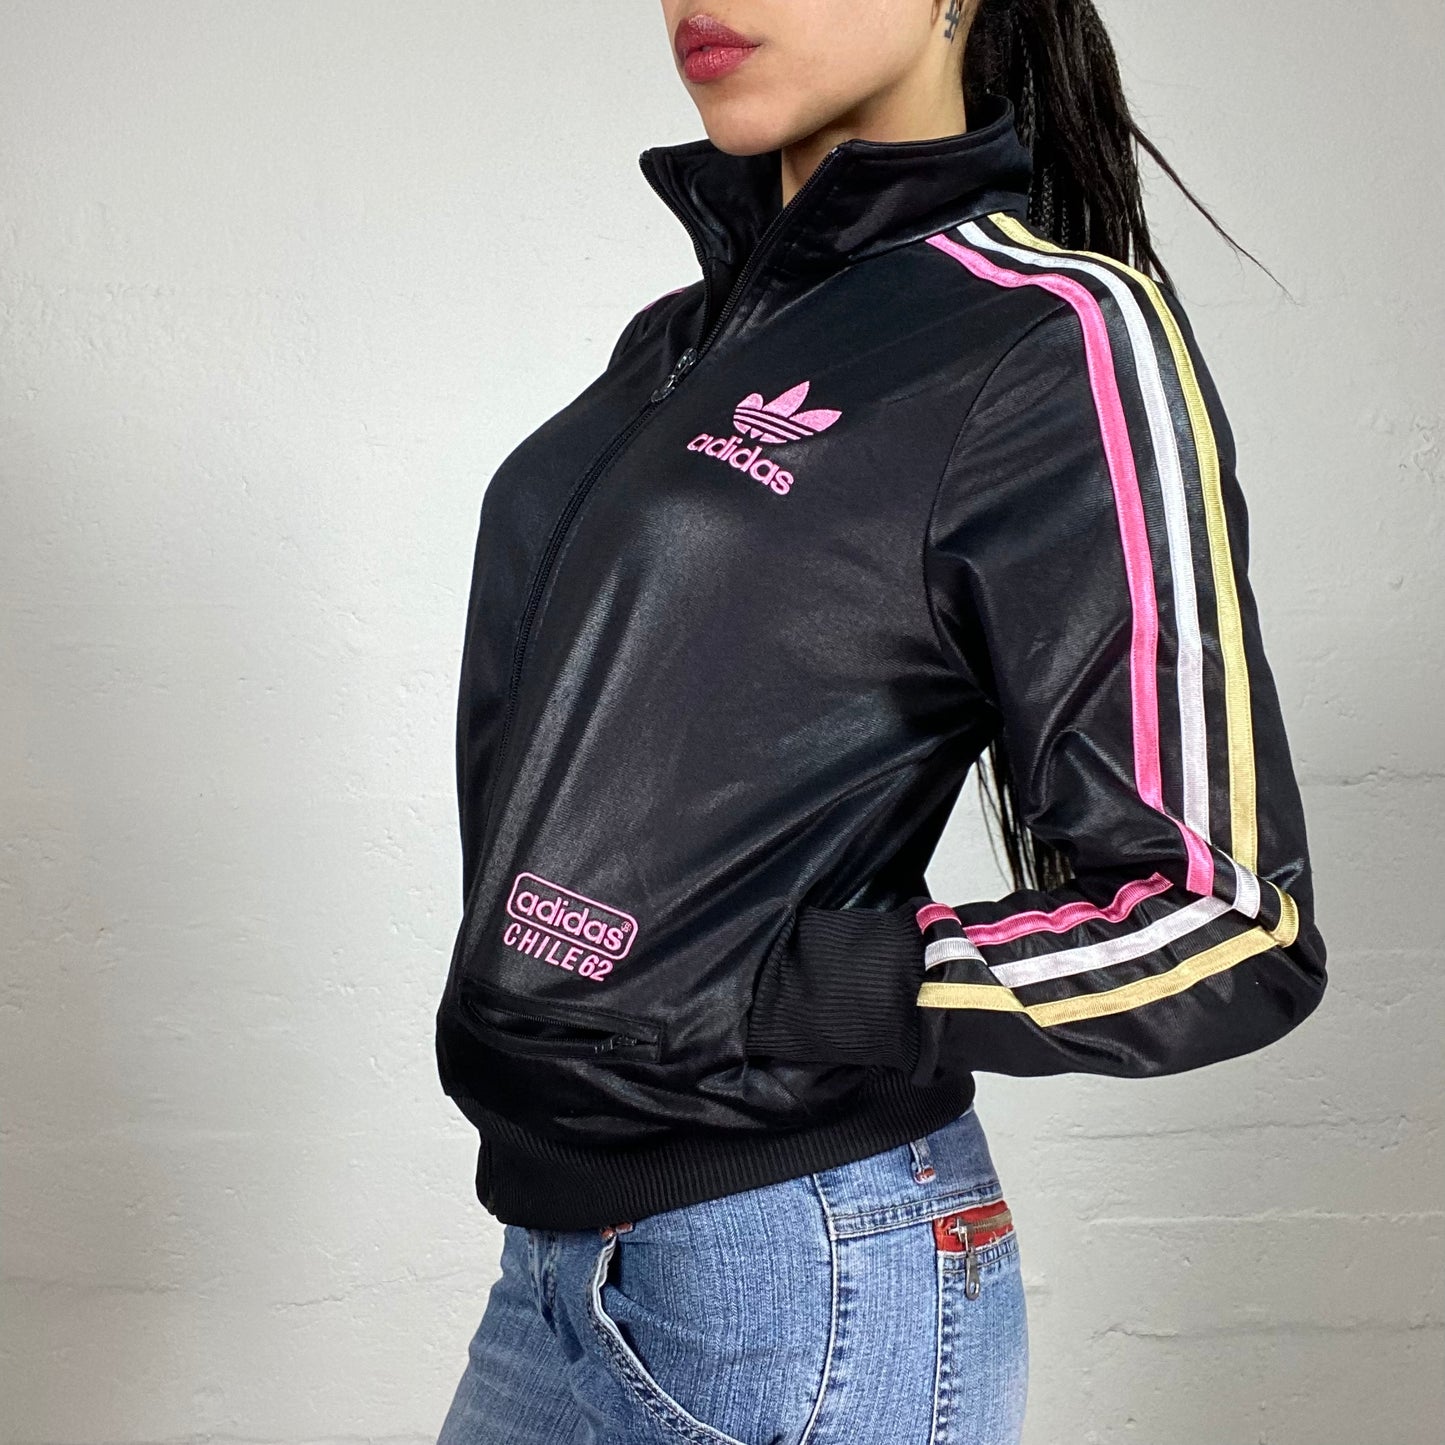 Vintage 80's Style Adidas Popstar Shimmer Black Zip Up with Pink Accents and Back Logo Embroidery (40)